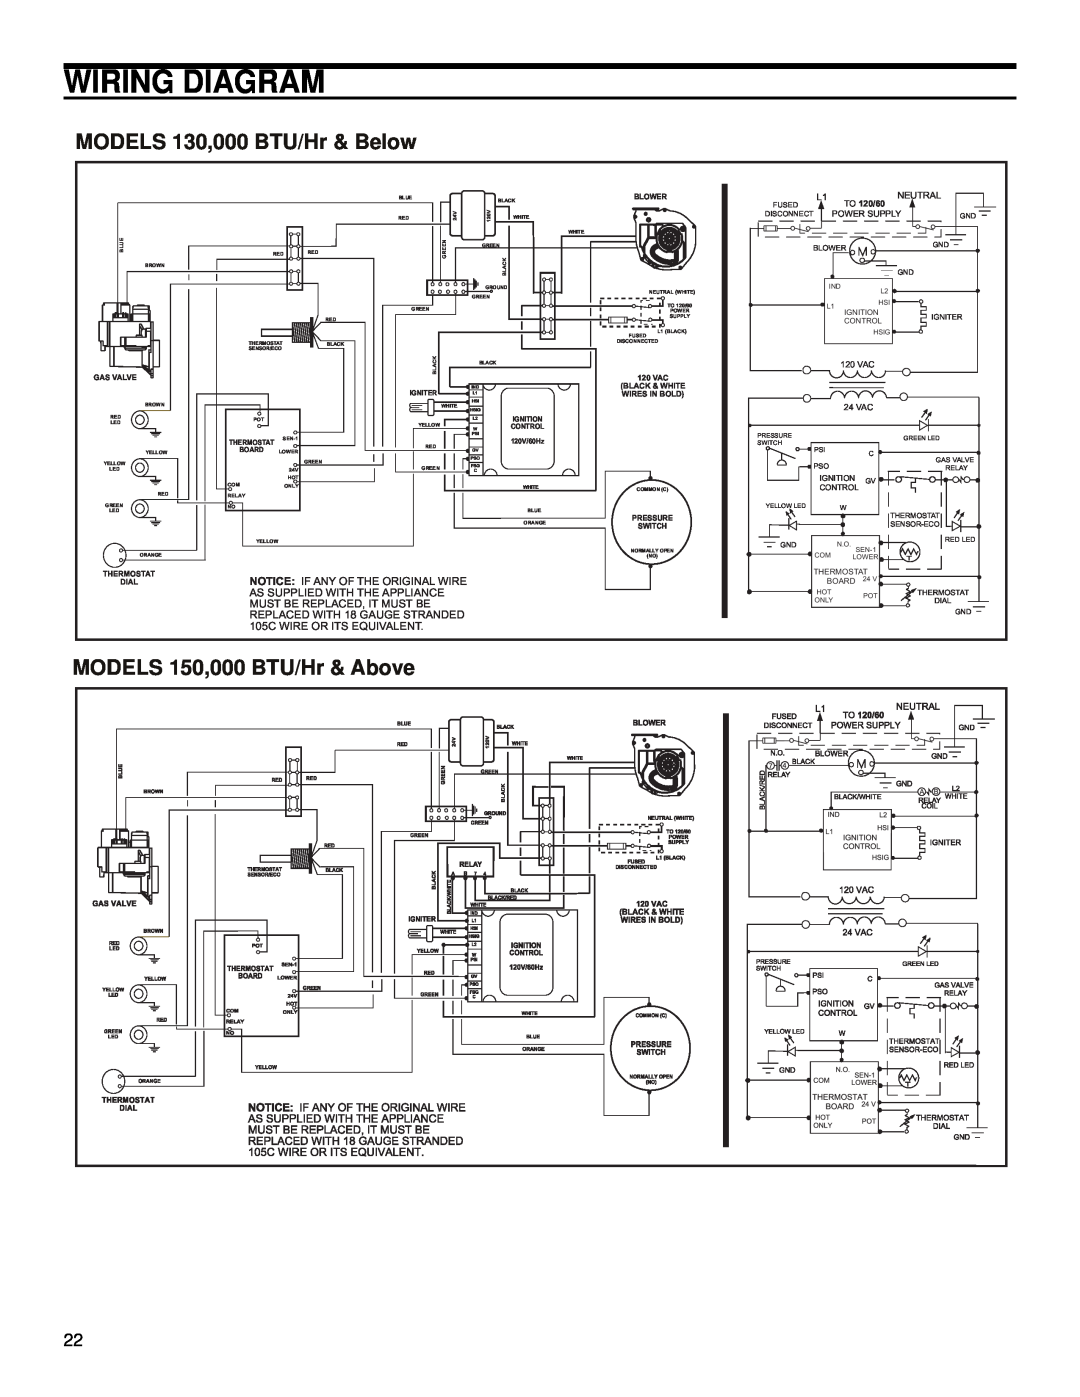 Polaris PG10* 34-100-2NV OR 2PV Wiring Diagram, Neutral, TO 120/60, 120 VAC, Blower, Pressure Switch, Fused, Disconnect 